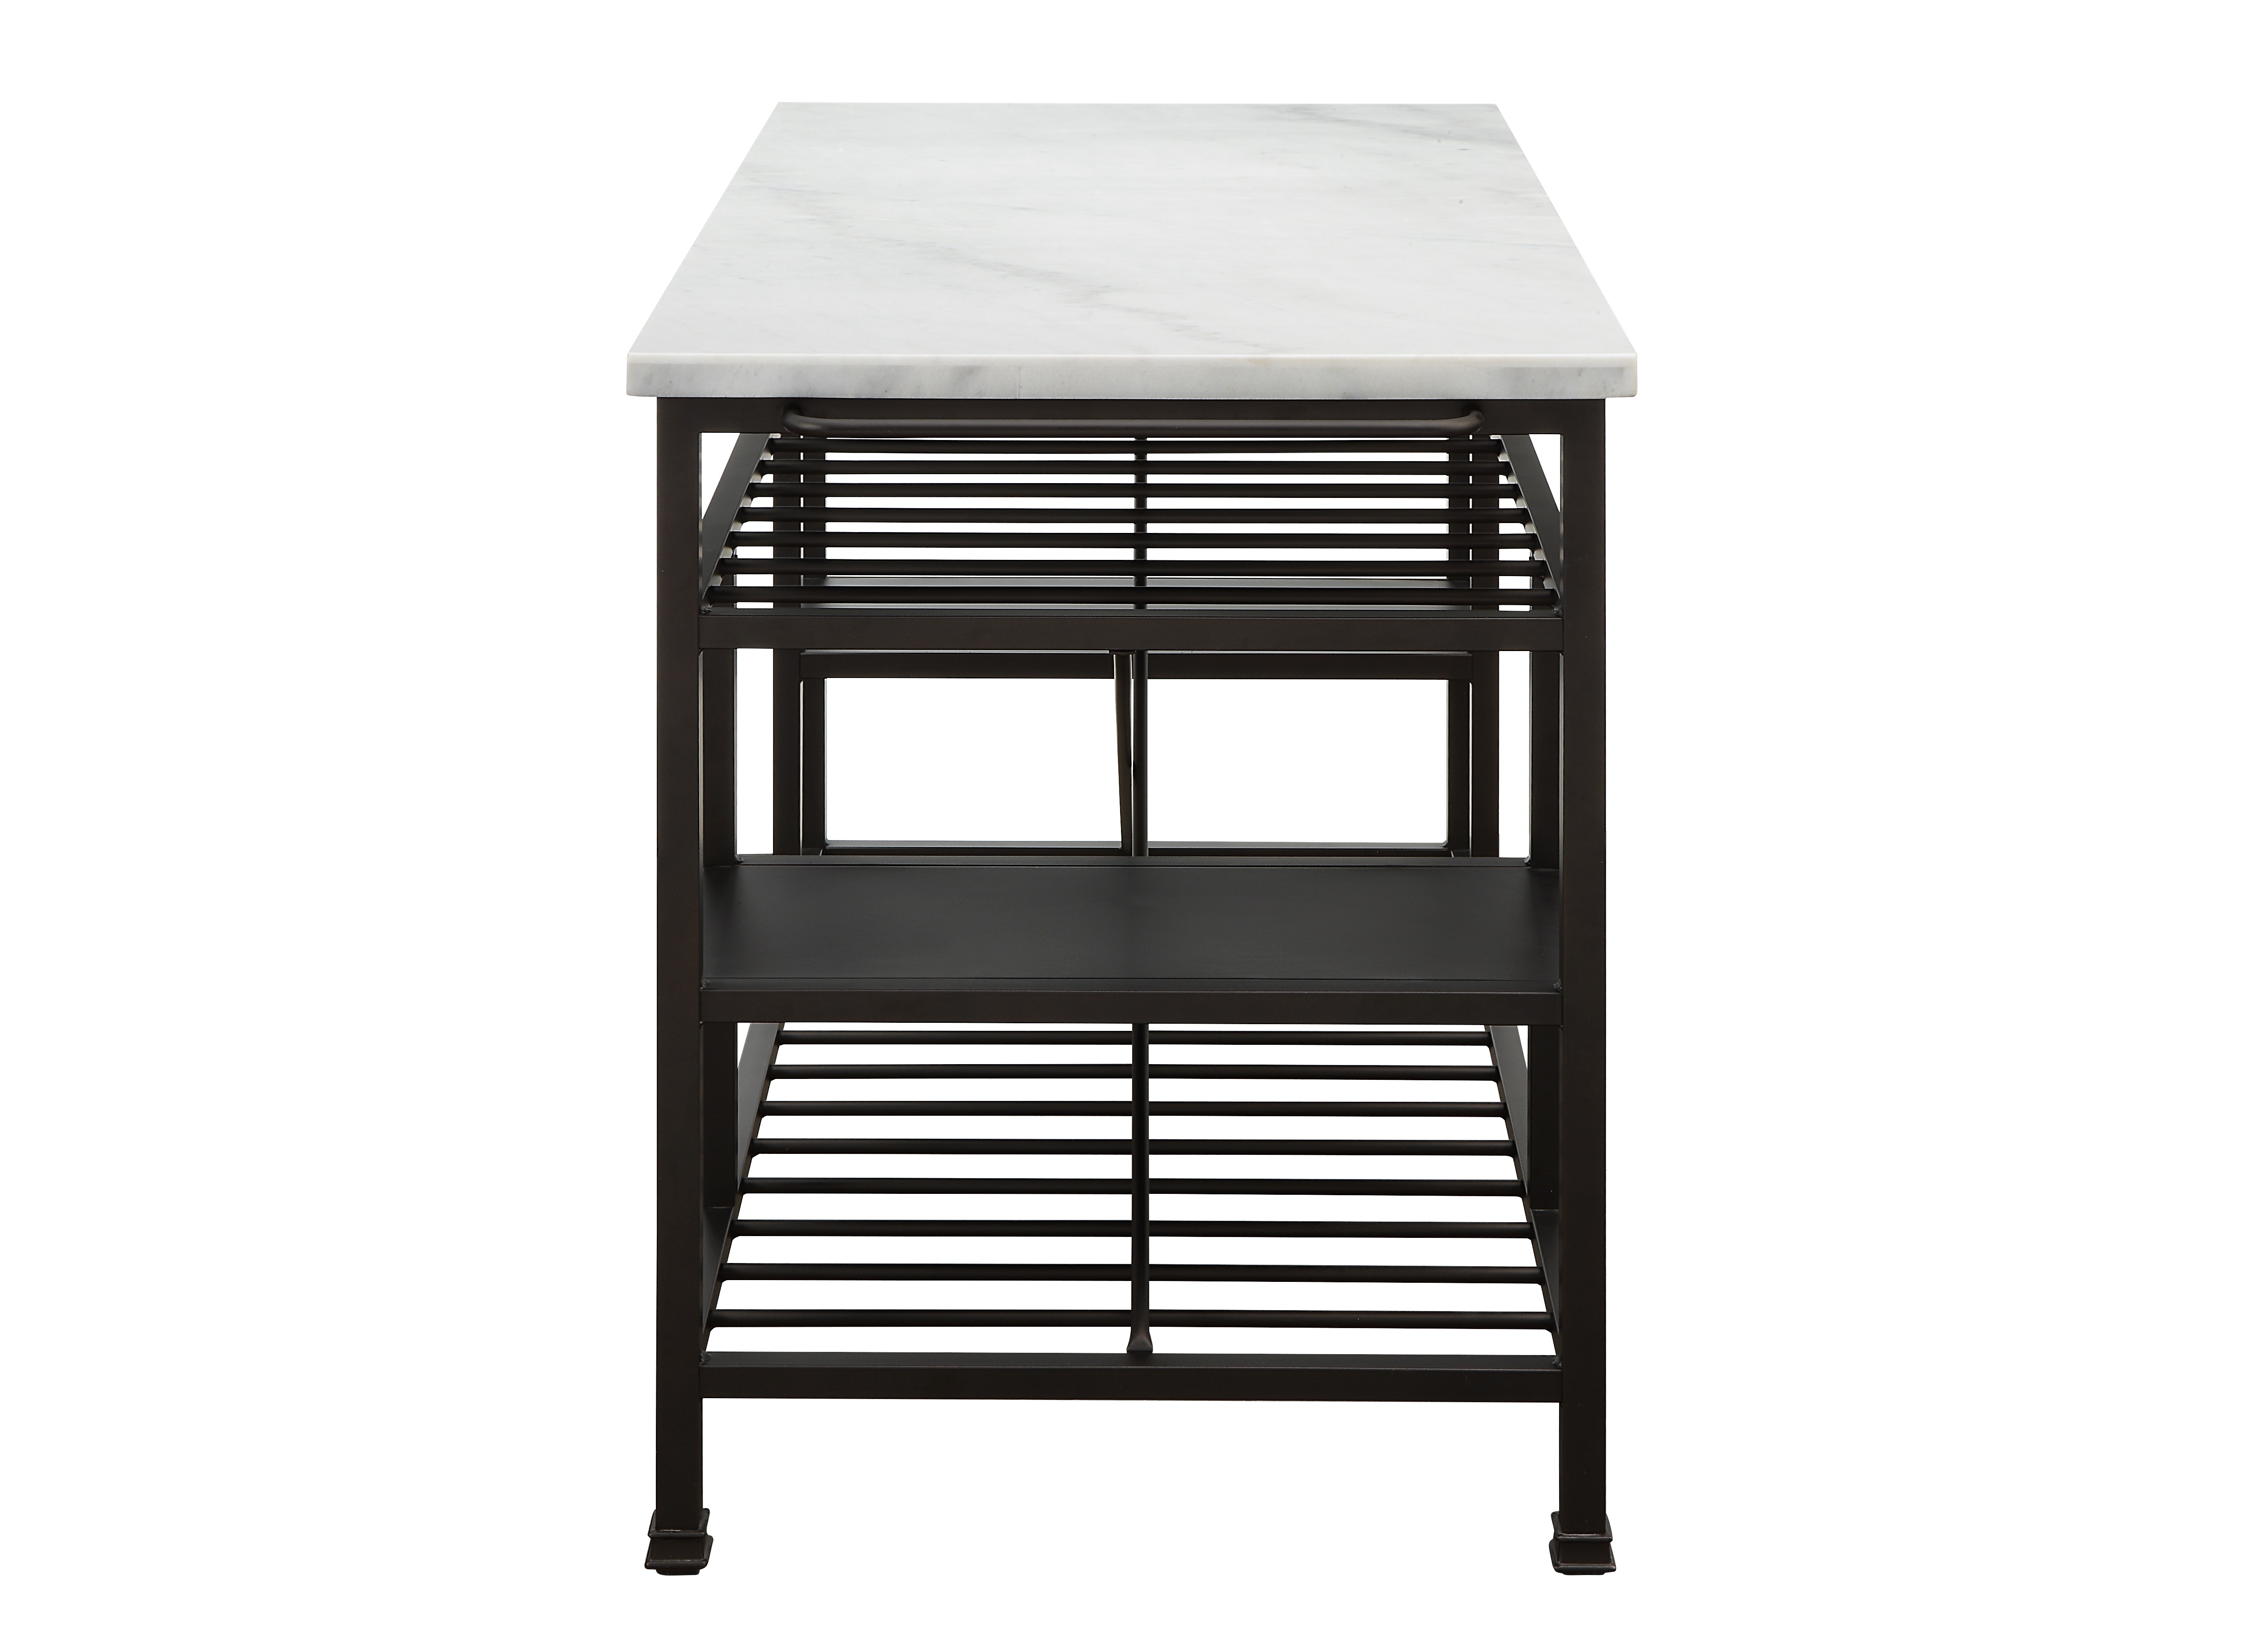 Marble Top Metal Kitchen Island With 2 Slated Shelves, Brown And White- Saltoro Sherpi